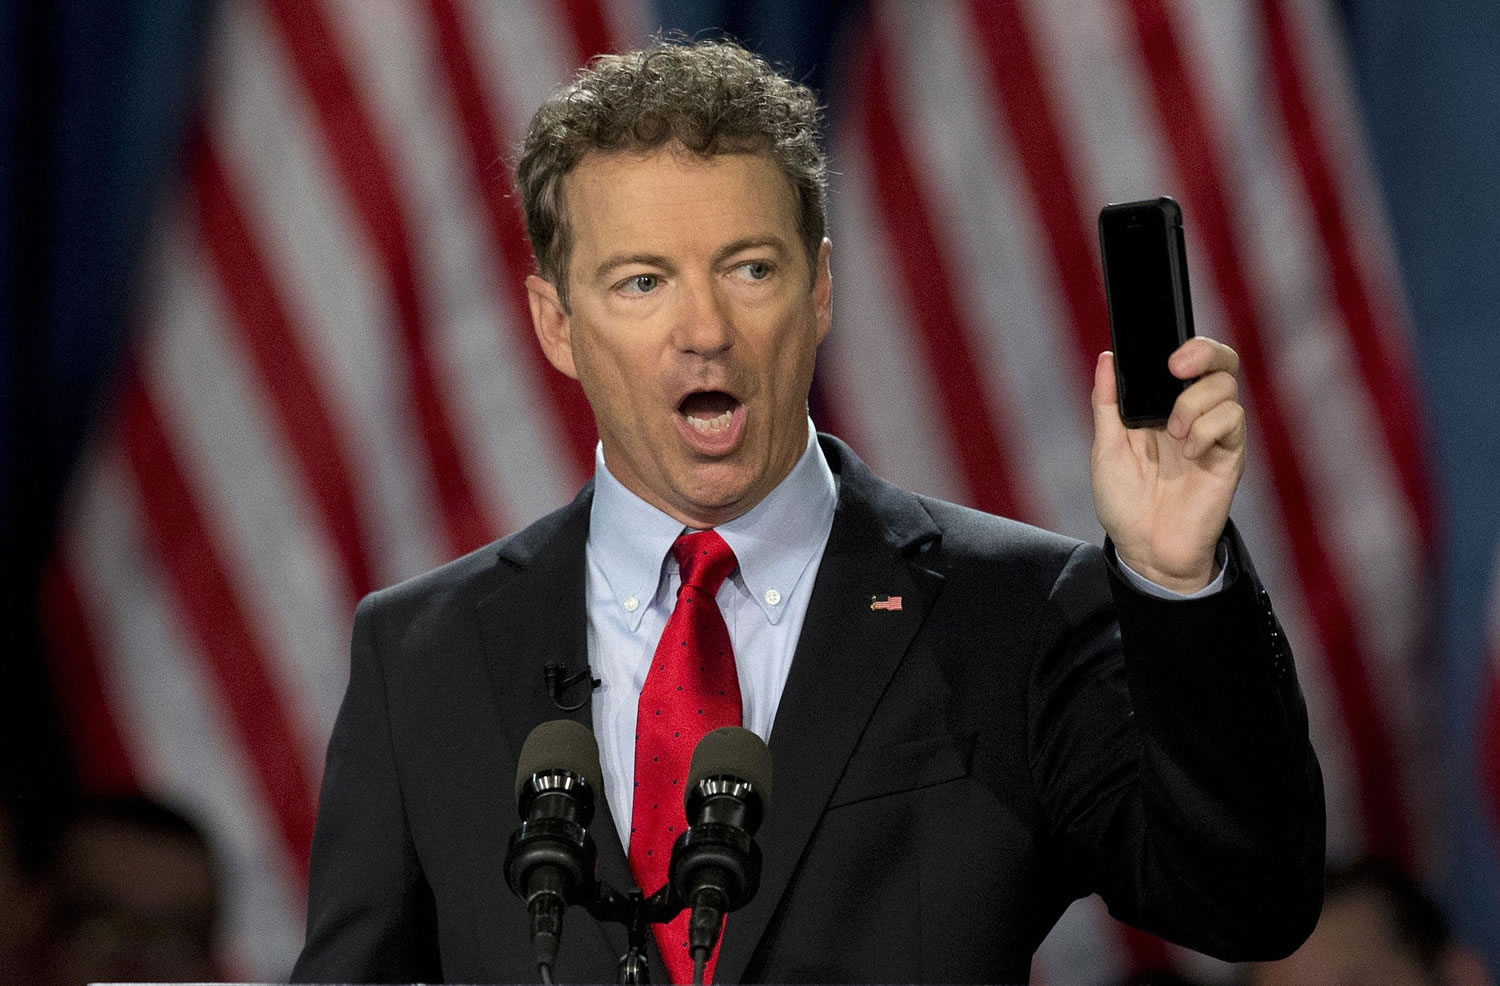 FILE - In this April 7, 2015 file photo, Sen. Rand Paul, R-Ky. holds up his cell phone as he speaks before announcing the start of his presidential campaign, in Louisville, Ky. The Justice Department warned lawmakers that the National Security Agency (NSA) will have to wind down its bulk collection of Americans' phone records by the end of the week if Congress fails to reauthorize the Patriot Act. The Republican divisions over the issue was on stark display in the Senate on Wednesday as Paul, a candidate for president, stood on the floor and spoke at length about his opposition to NSA spying.